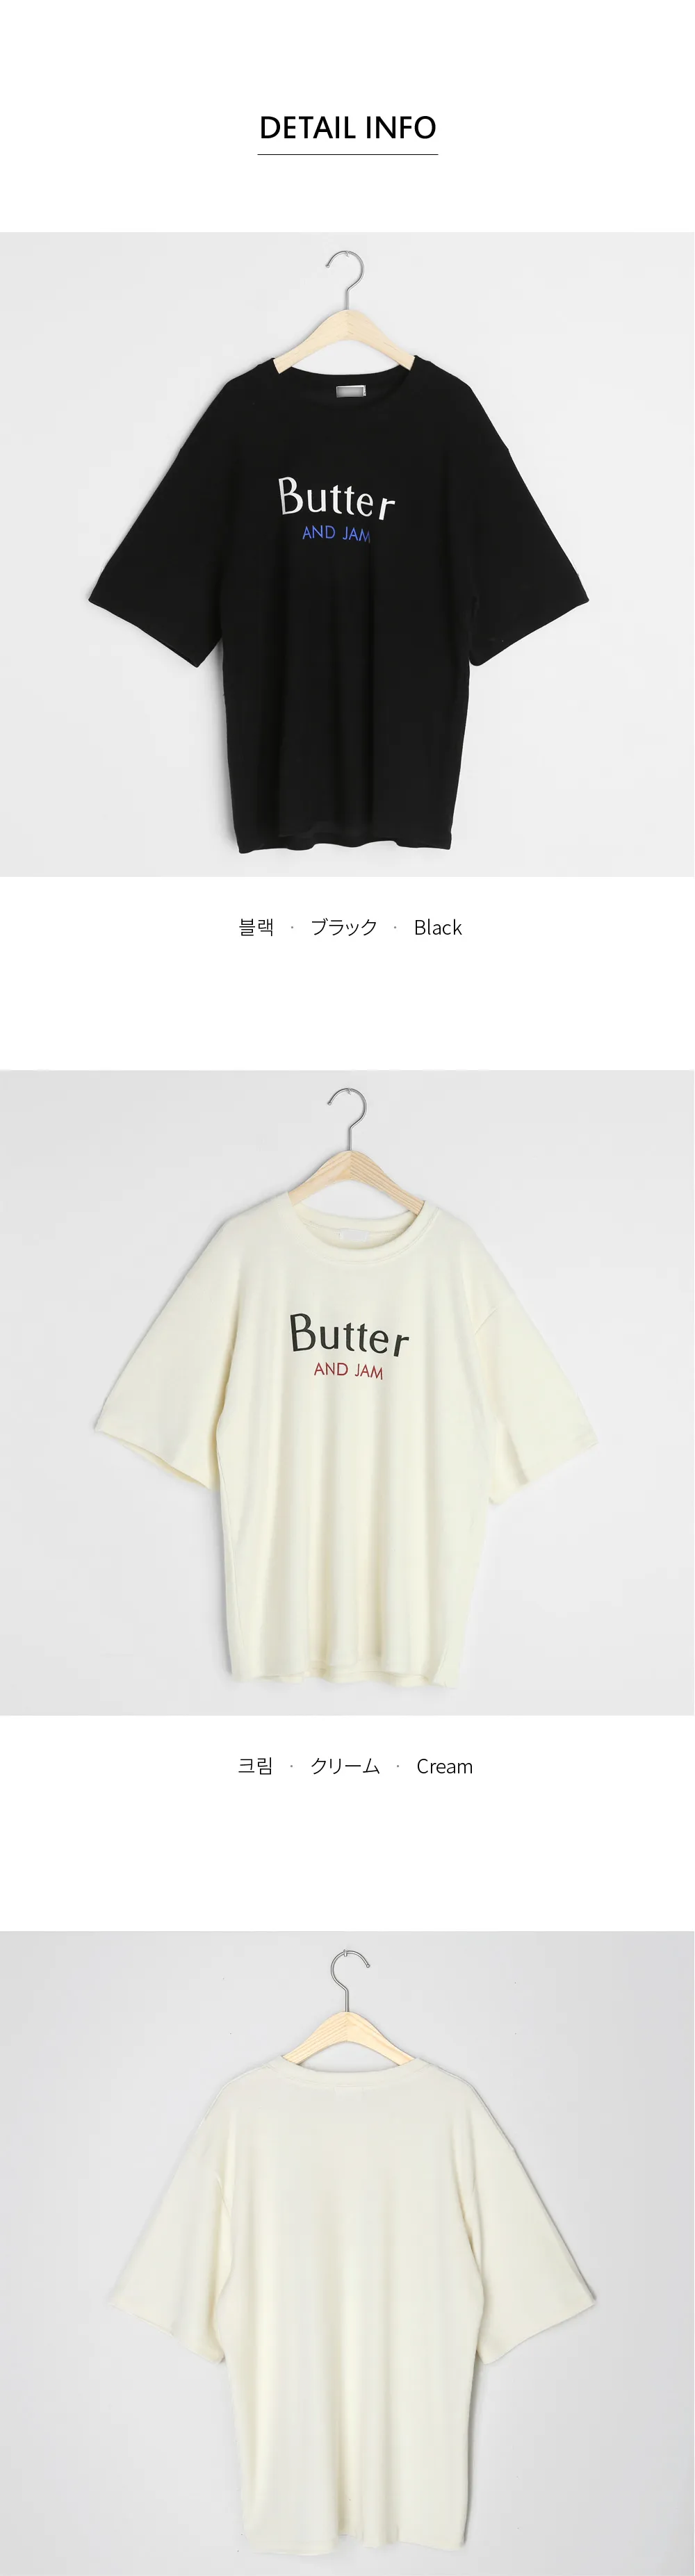 Butter AND JAMルーズTシャツ・全2色 | DHOLIC | 詳細画像20